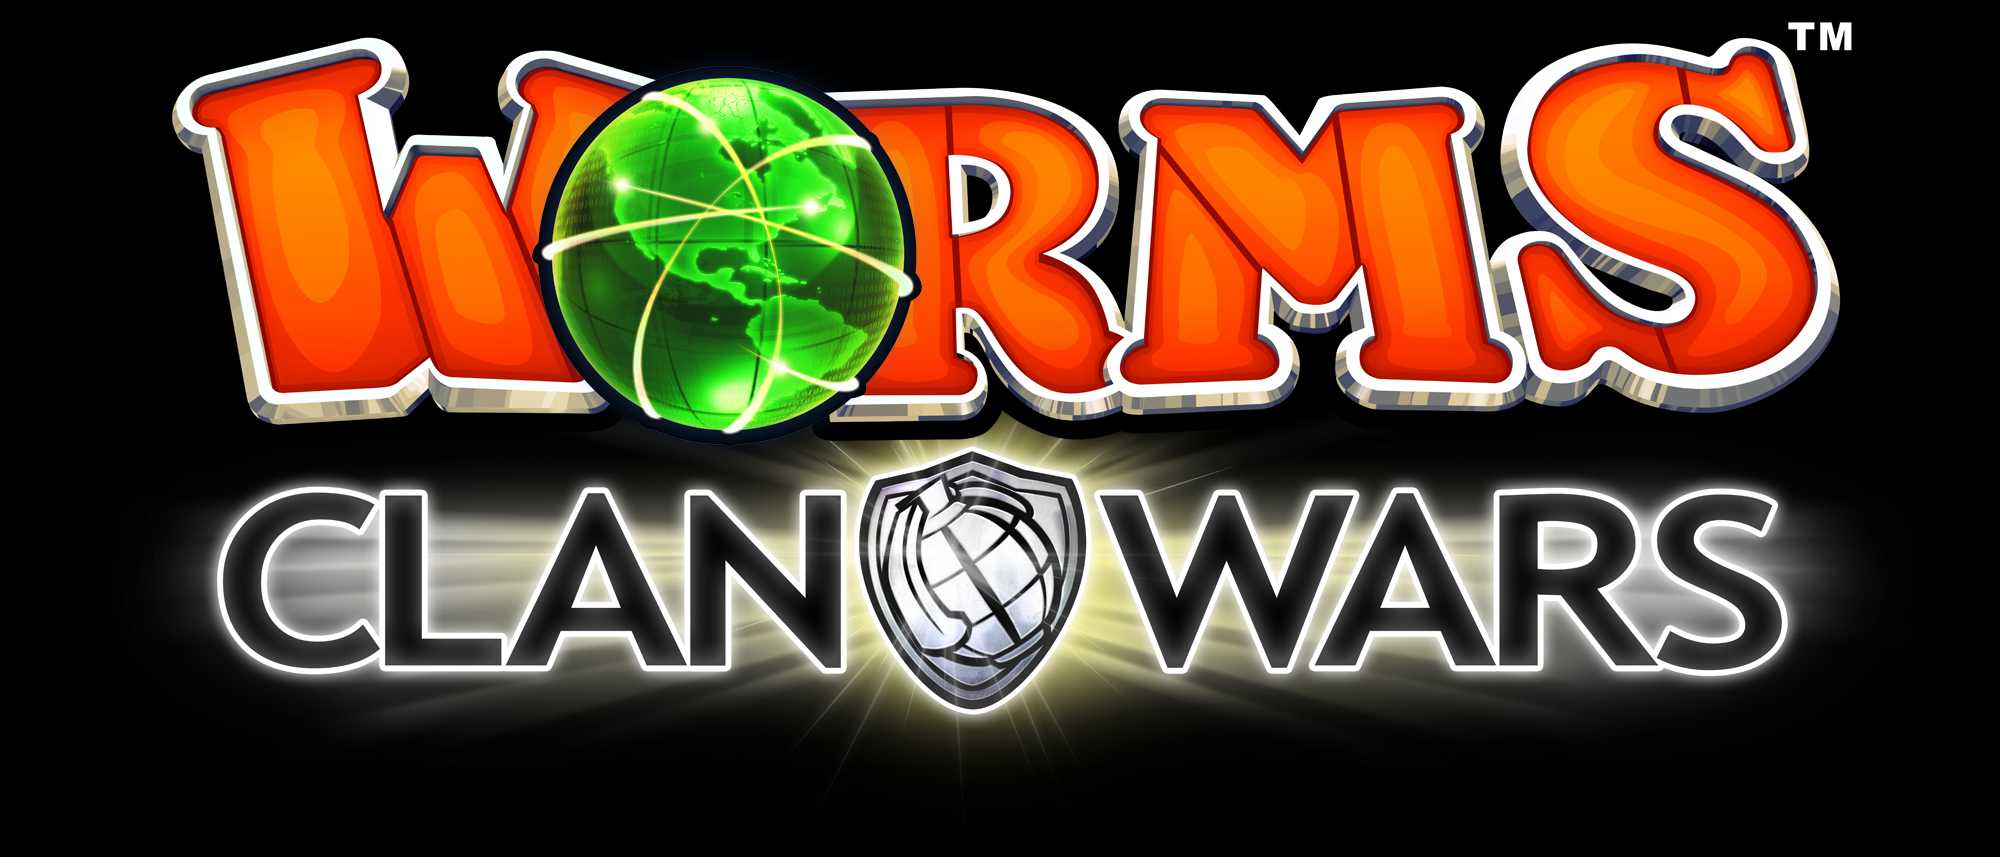 Worms Clan Wars Screen 8